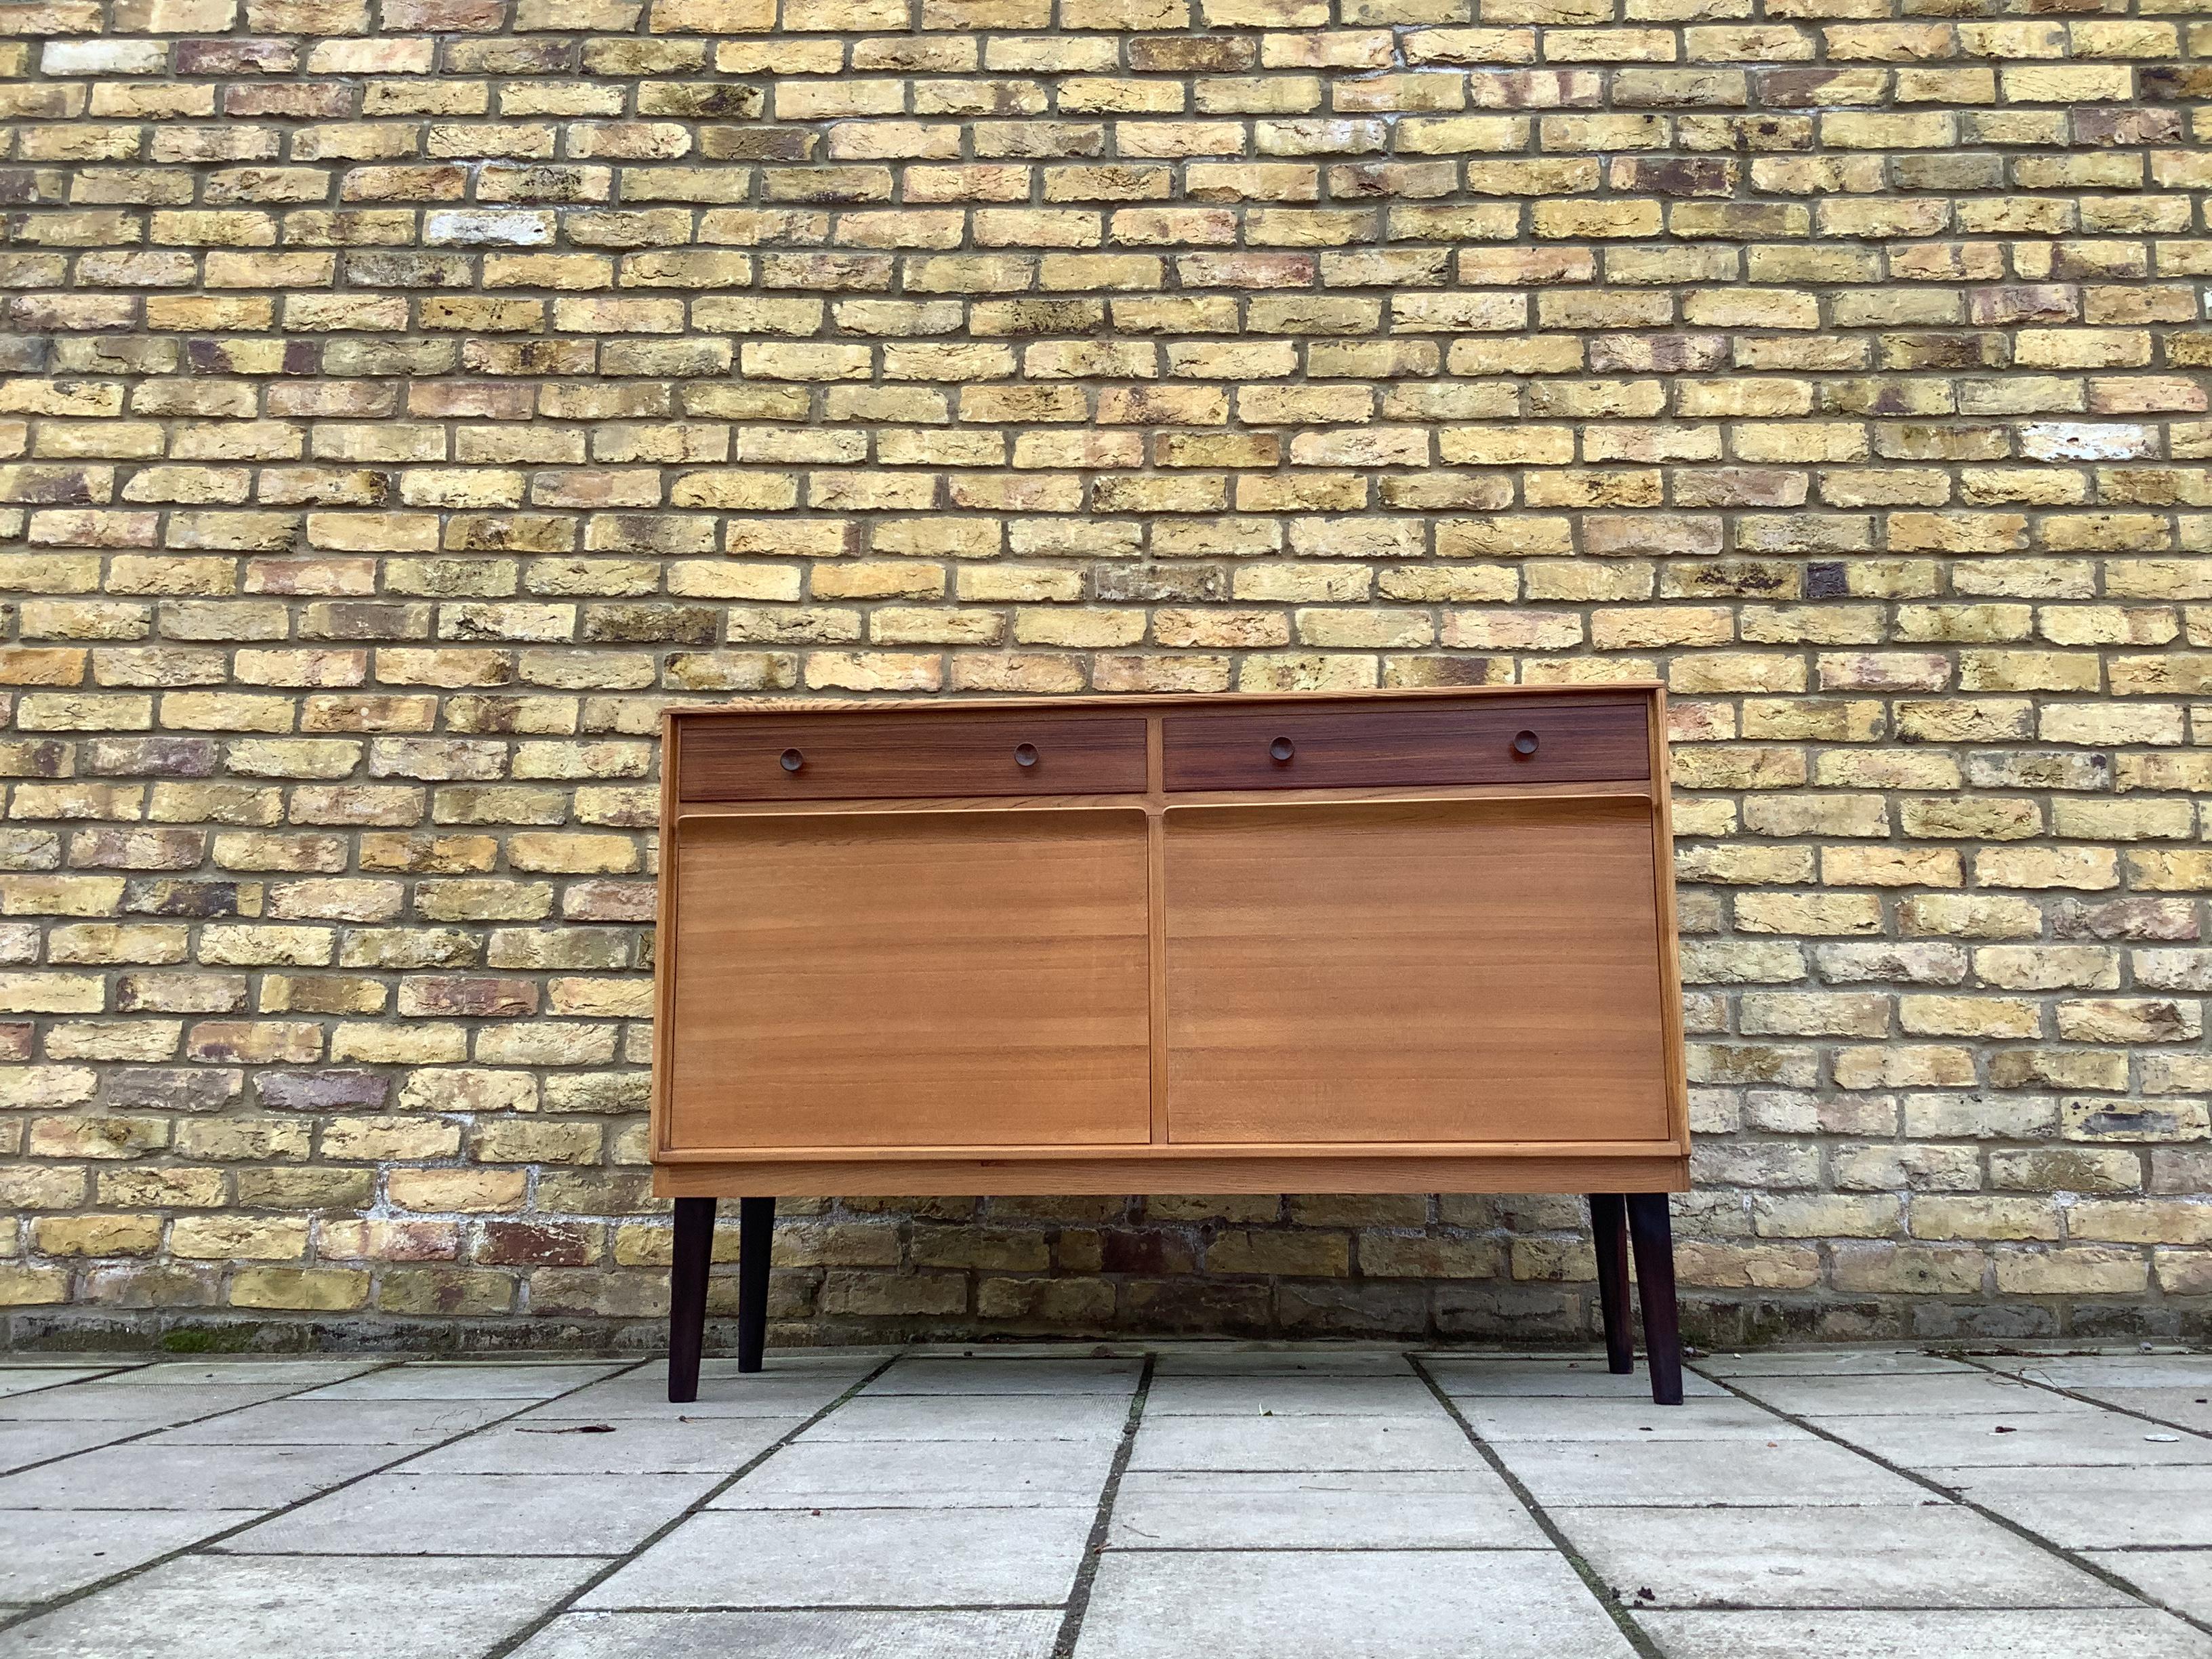 Rare midcentury Gordon Russell sideboard from the 1950s-1960s. Great compact size. A really well made, high quality, and increasingly rare piece of British manufacturing and design. 

This compact sideboard features a cabinet section with two twin